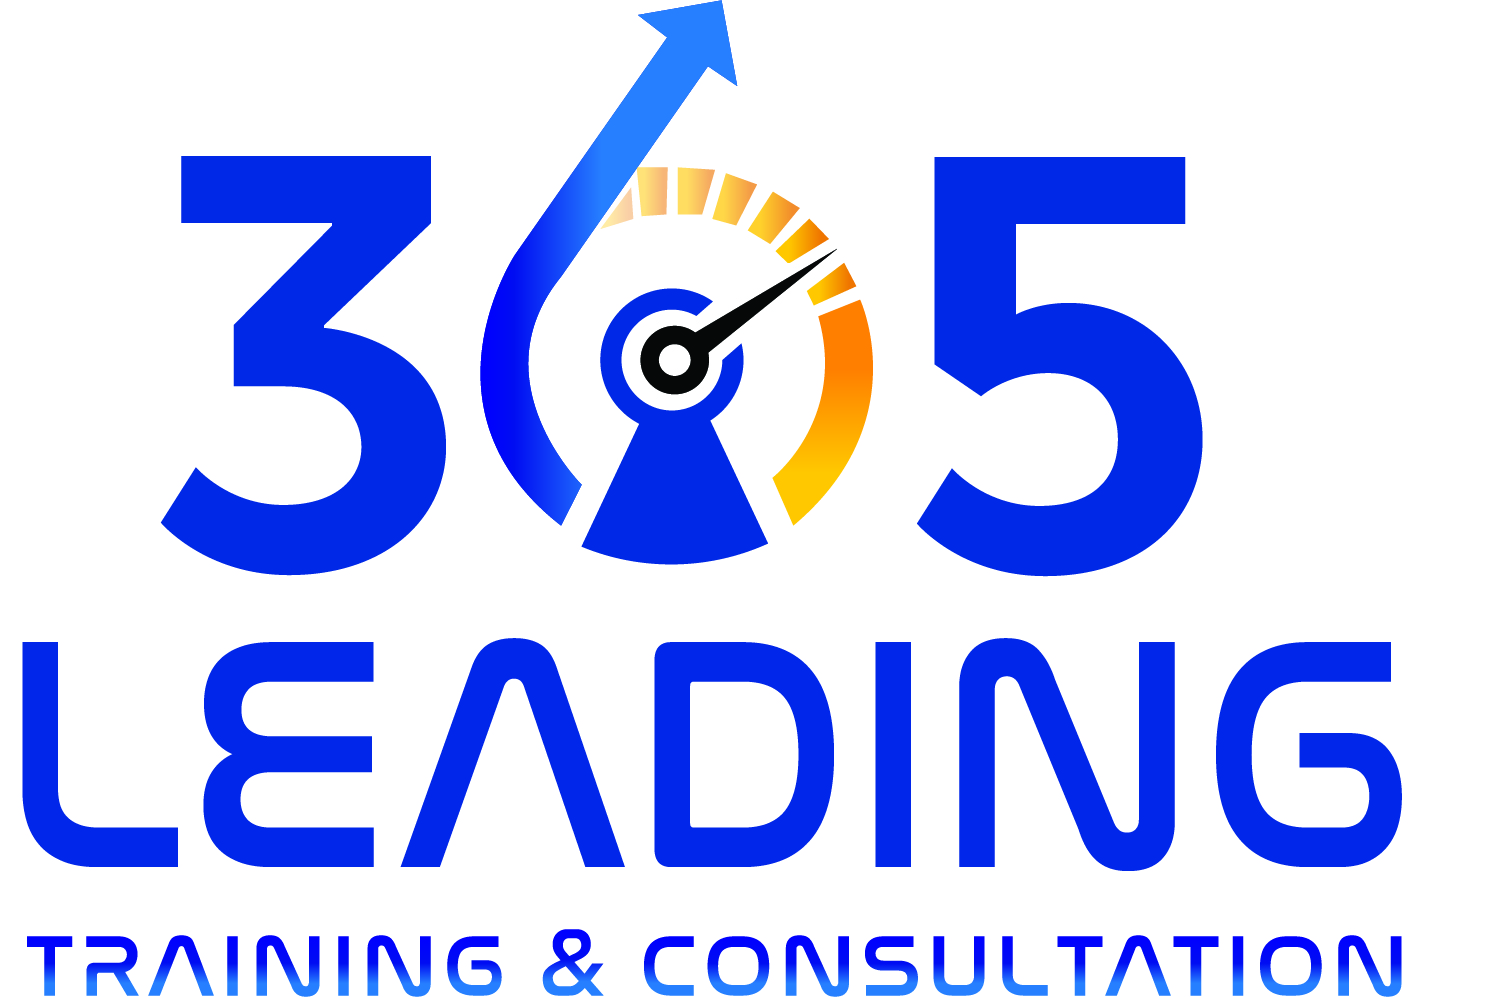 Leading 365 for Training and Consultation 